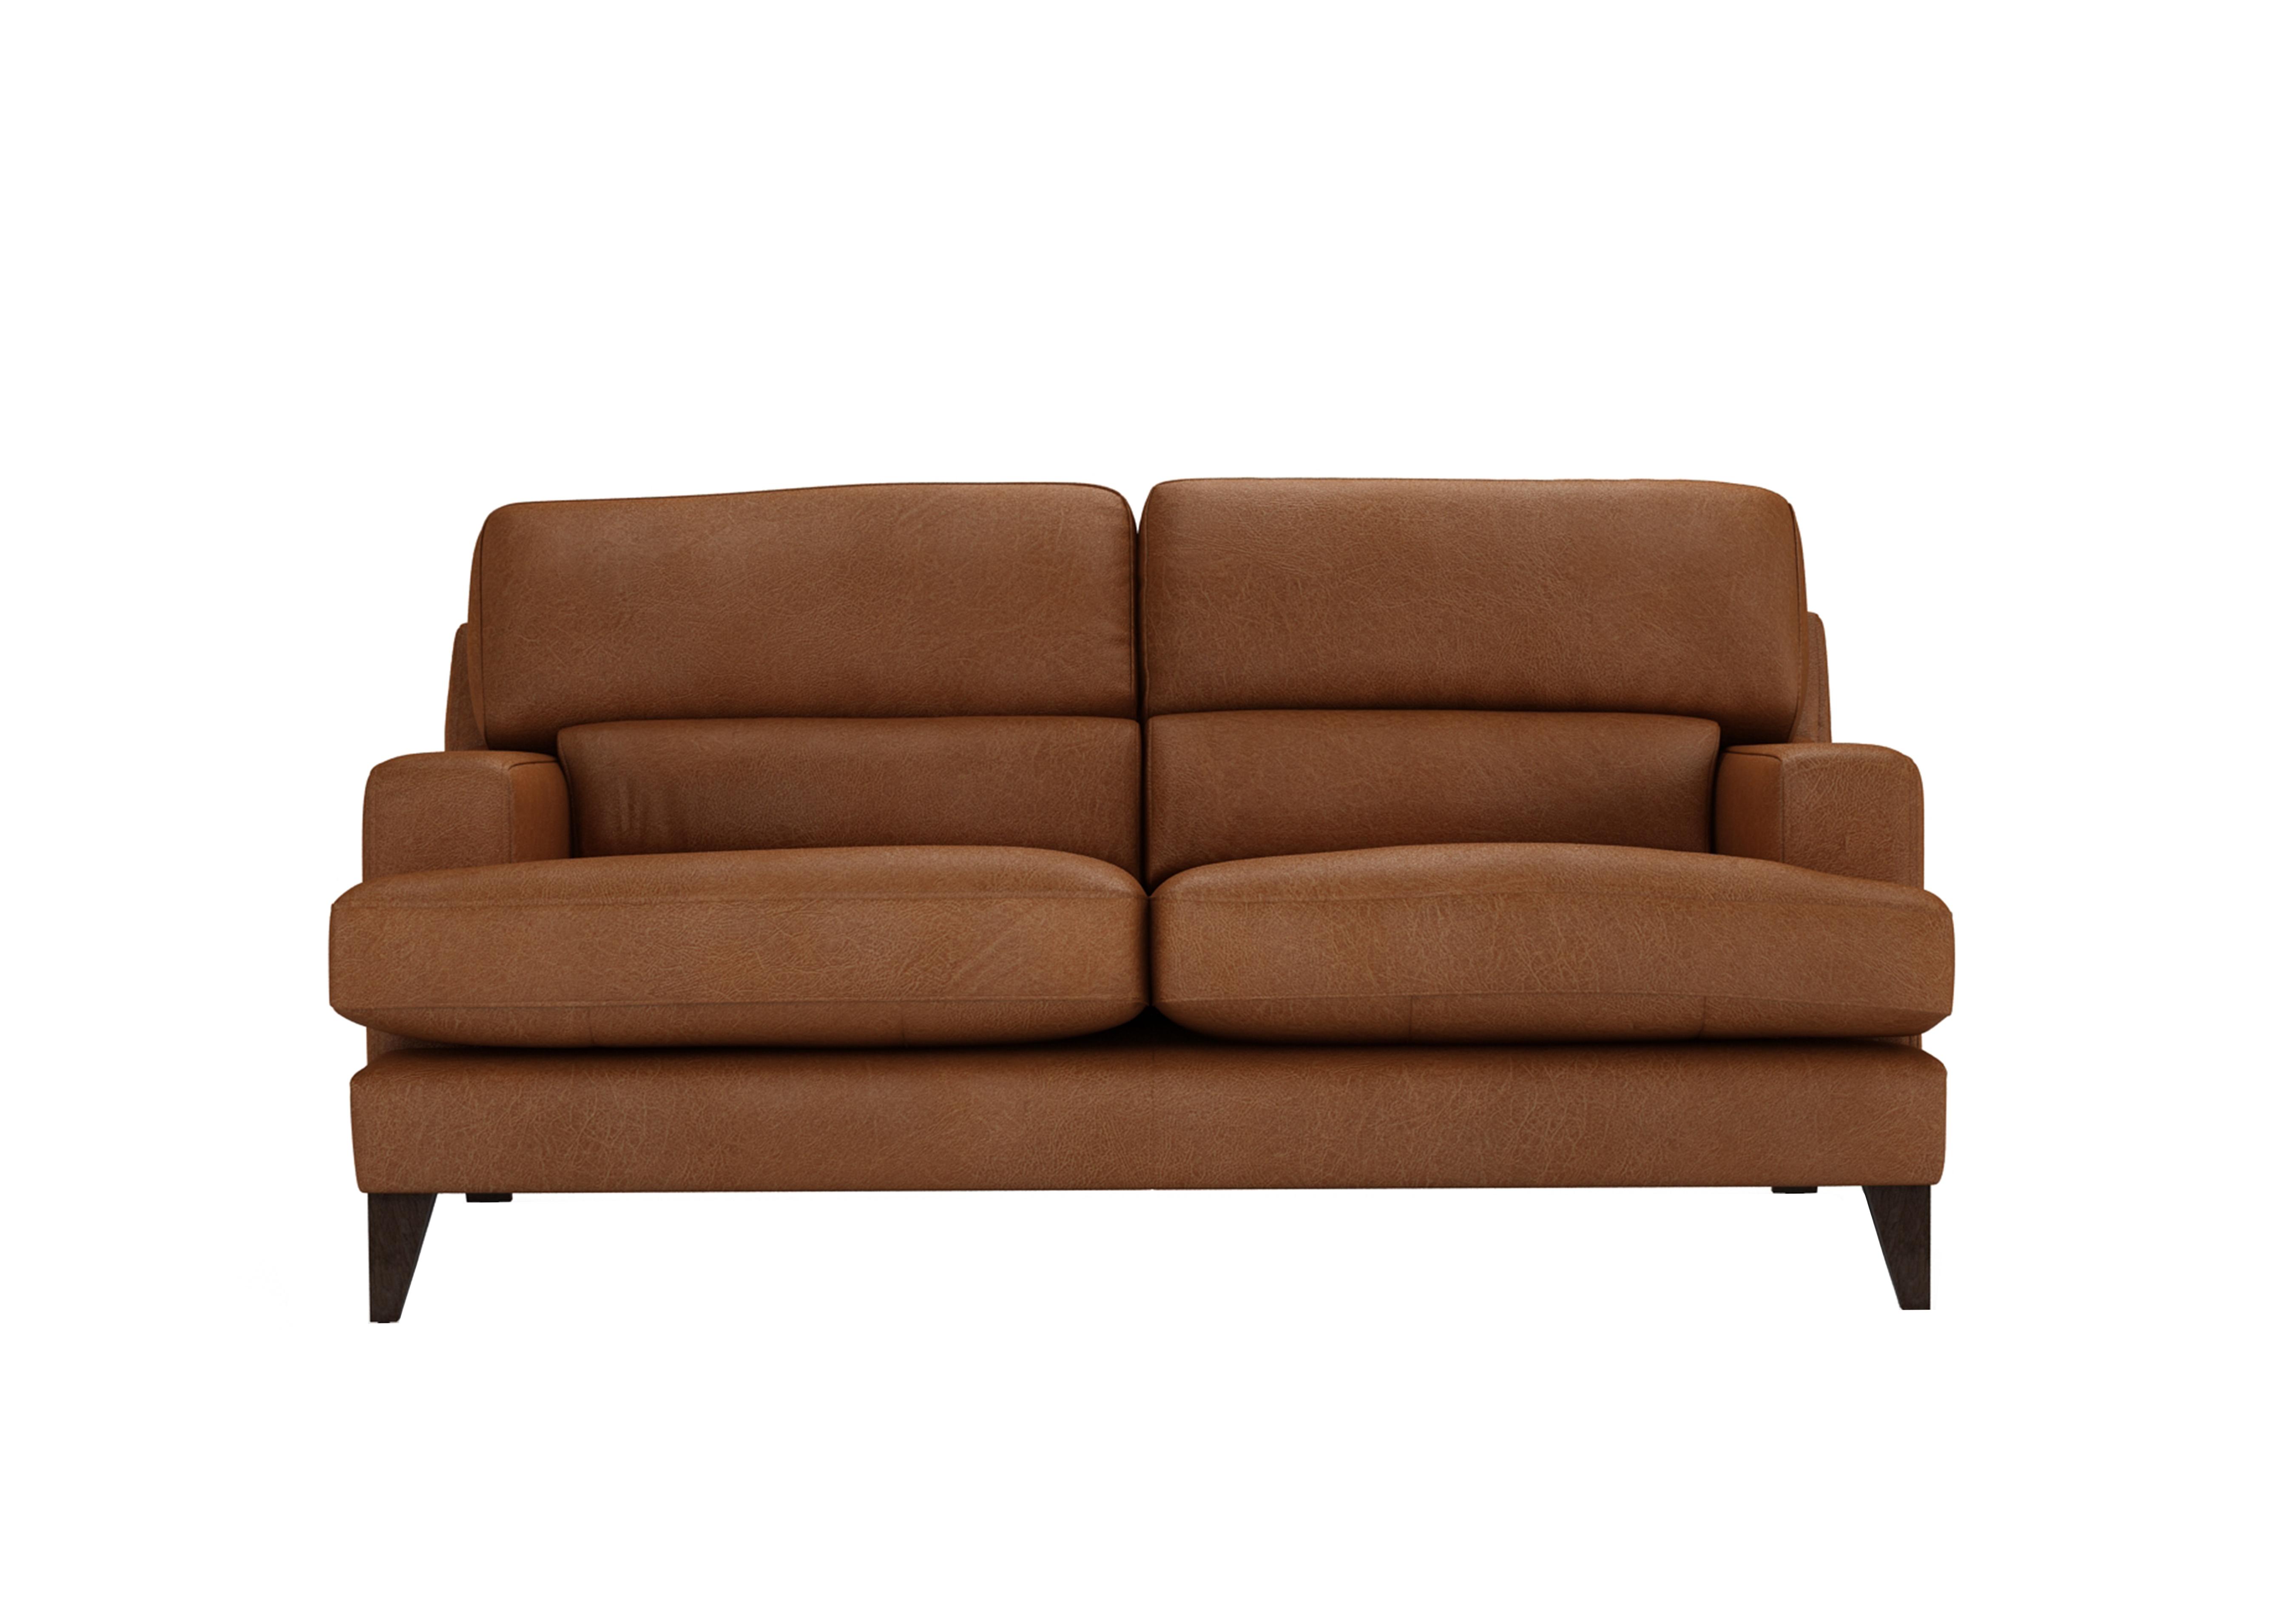 Romilly 2.5 Seater Leather Sofa in Tob190 Tobacco Wa Ft on Furniture Village